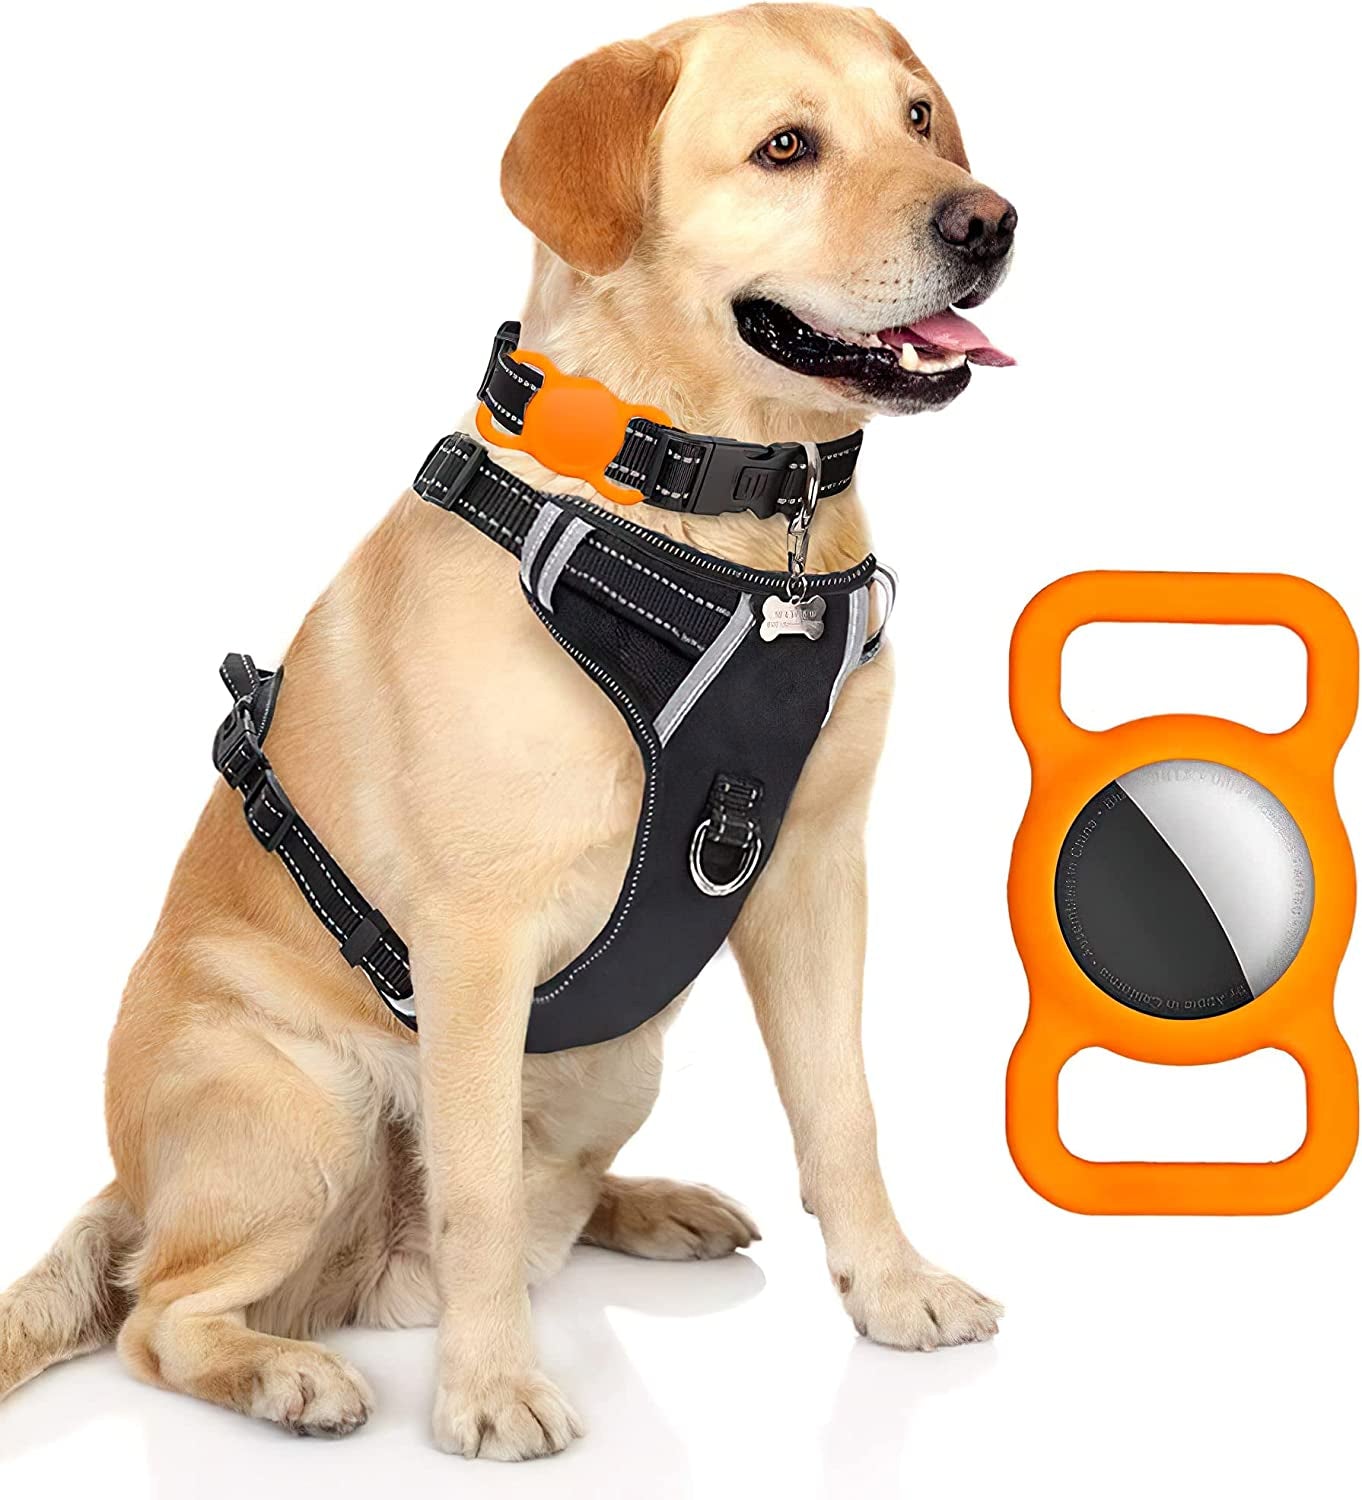 Fangsheng Airtag Dog Collar Pet Airtags Case Cover,Protective Case for Airtags Finder Scratch Pet Loop Holder for Apple Airtag (Orange),1Pack,1/Pack